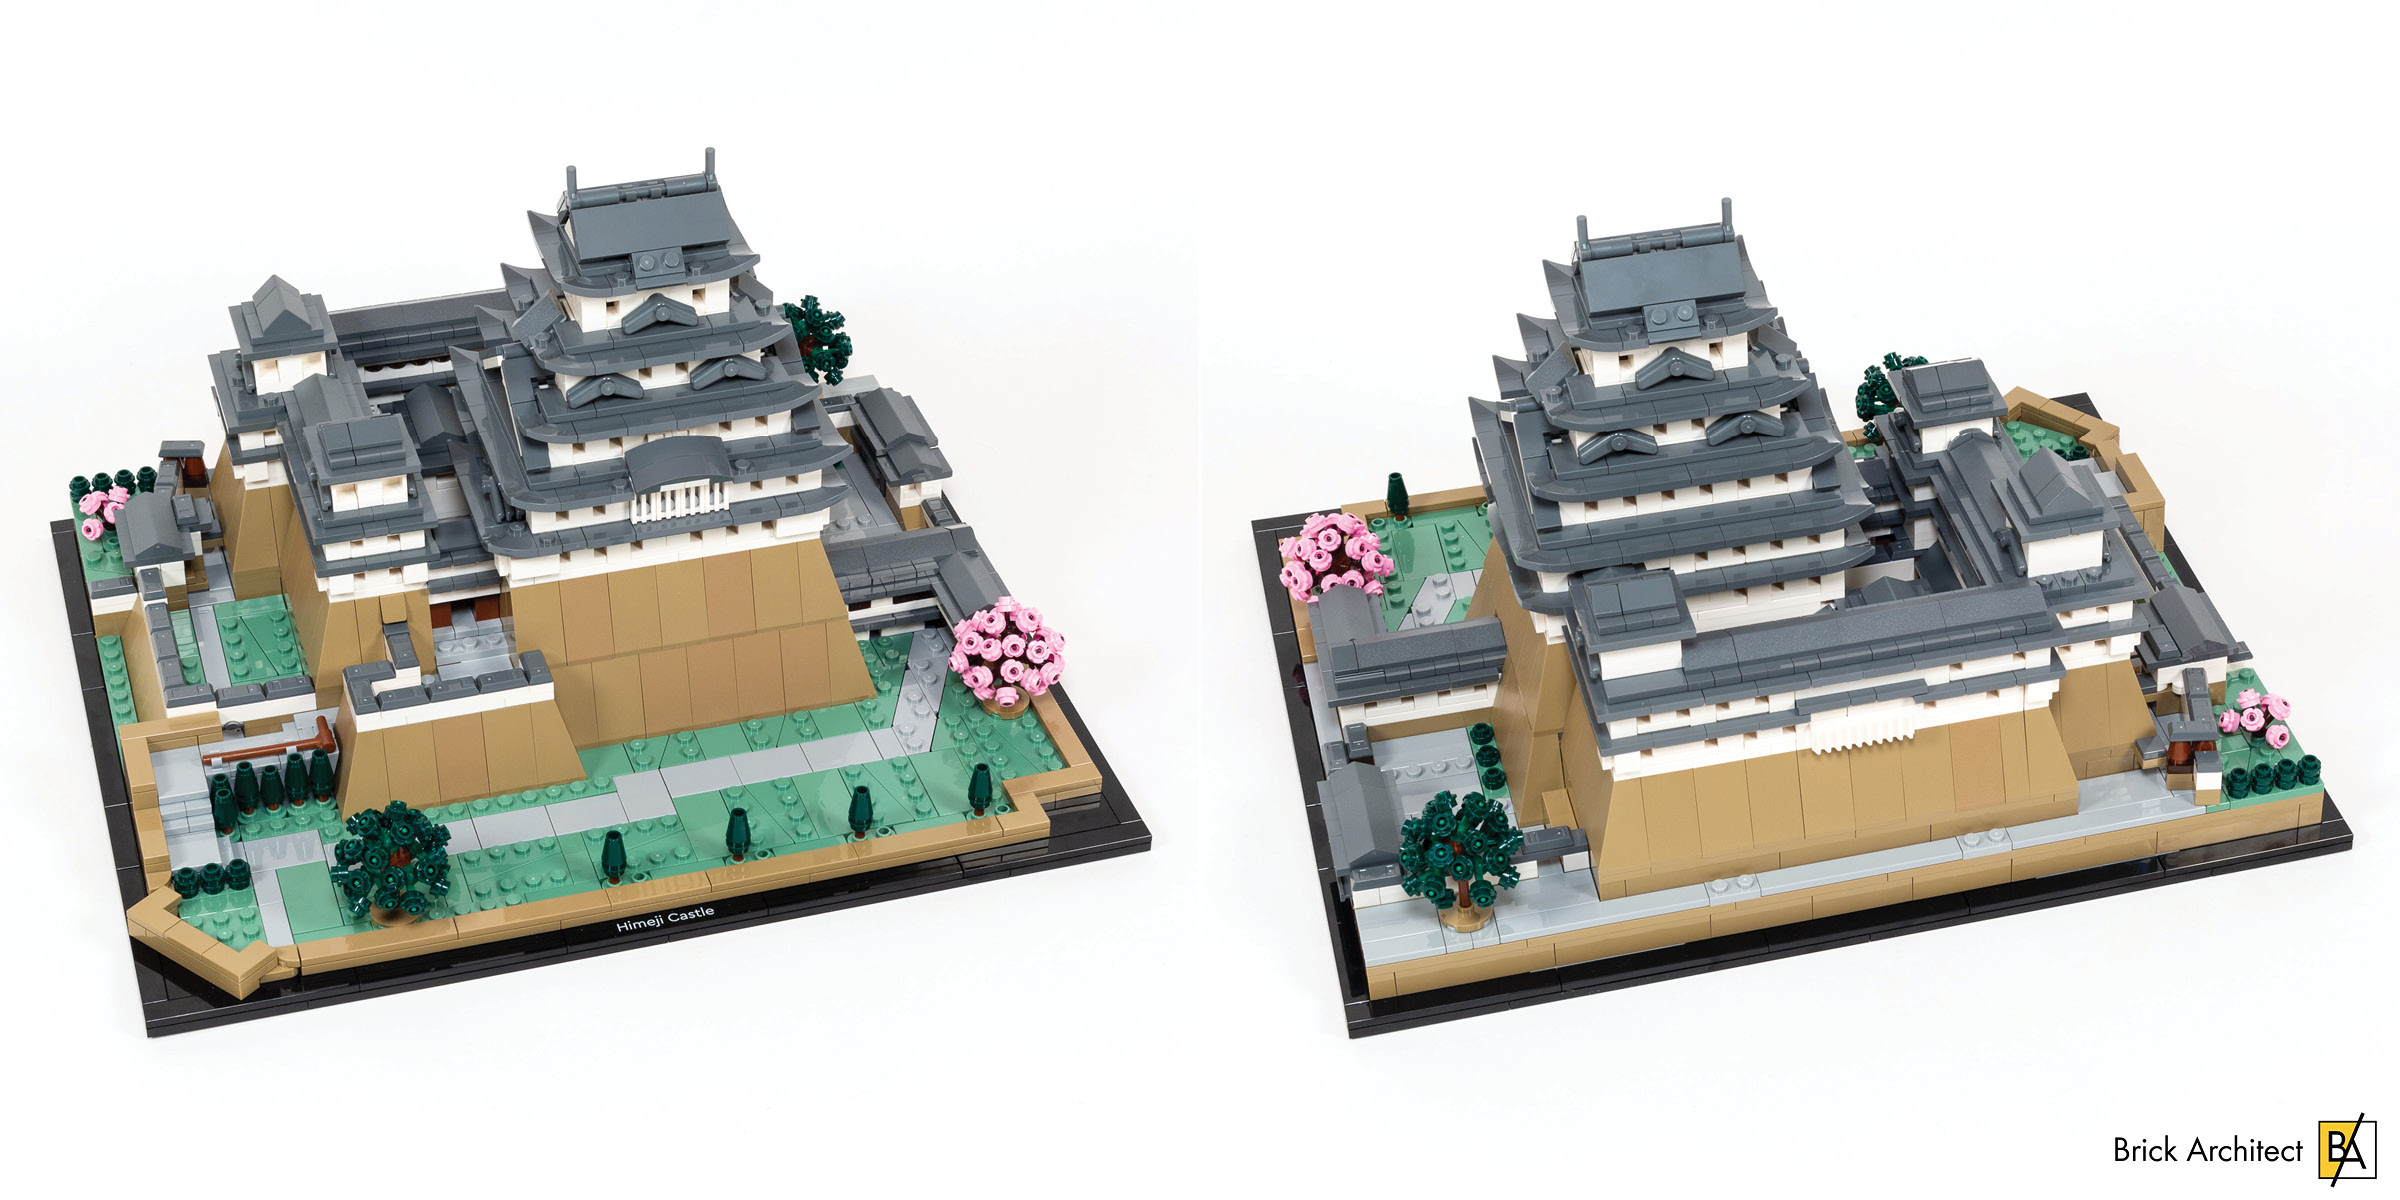 Build Japan's Himeji Castle with Lego's latest collection for adults